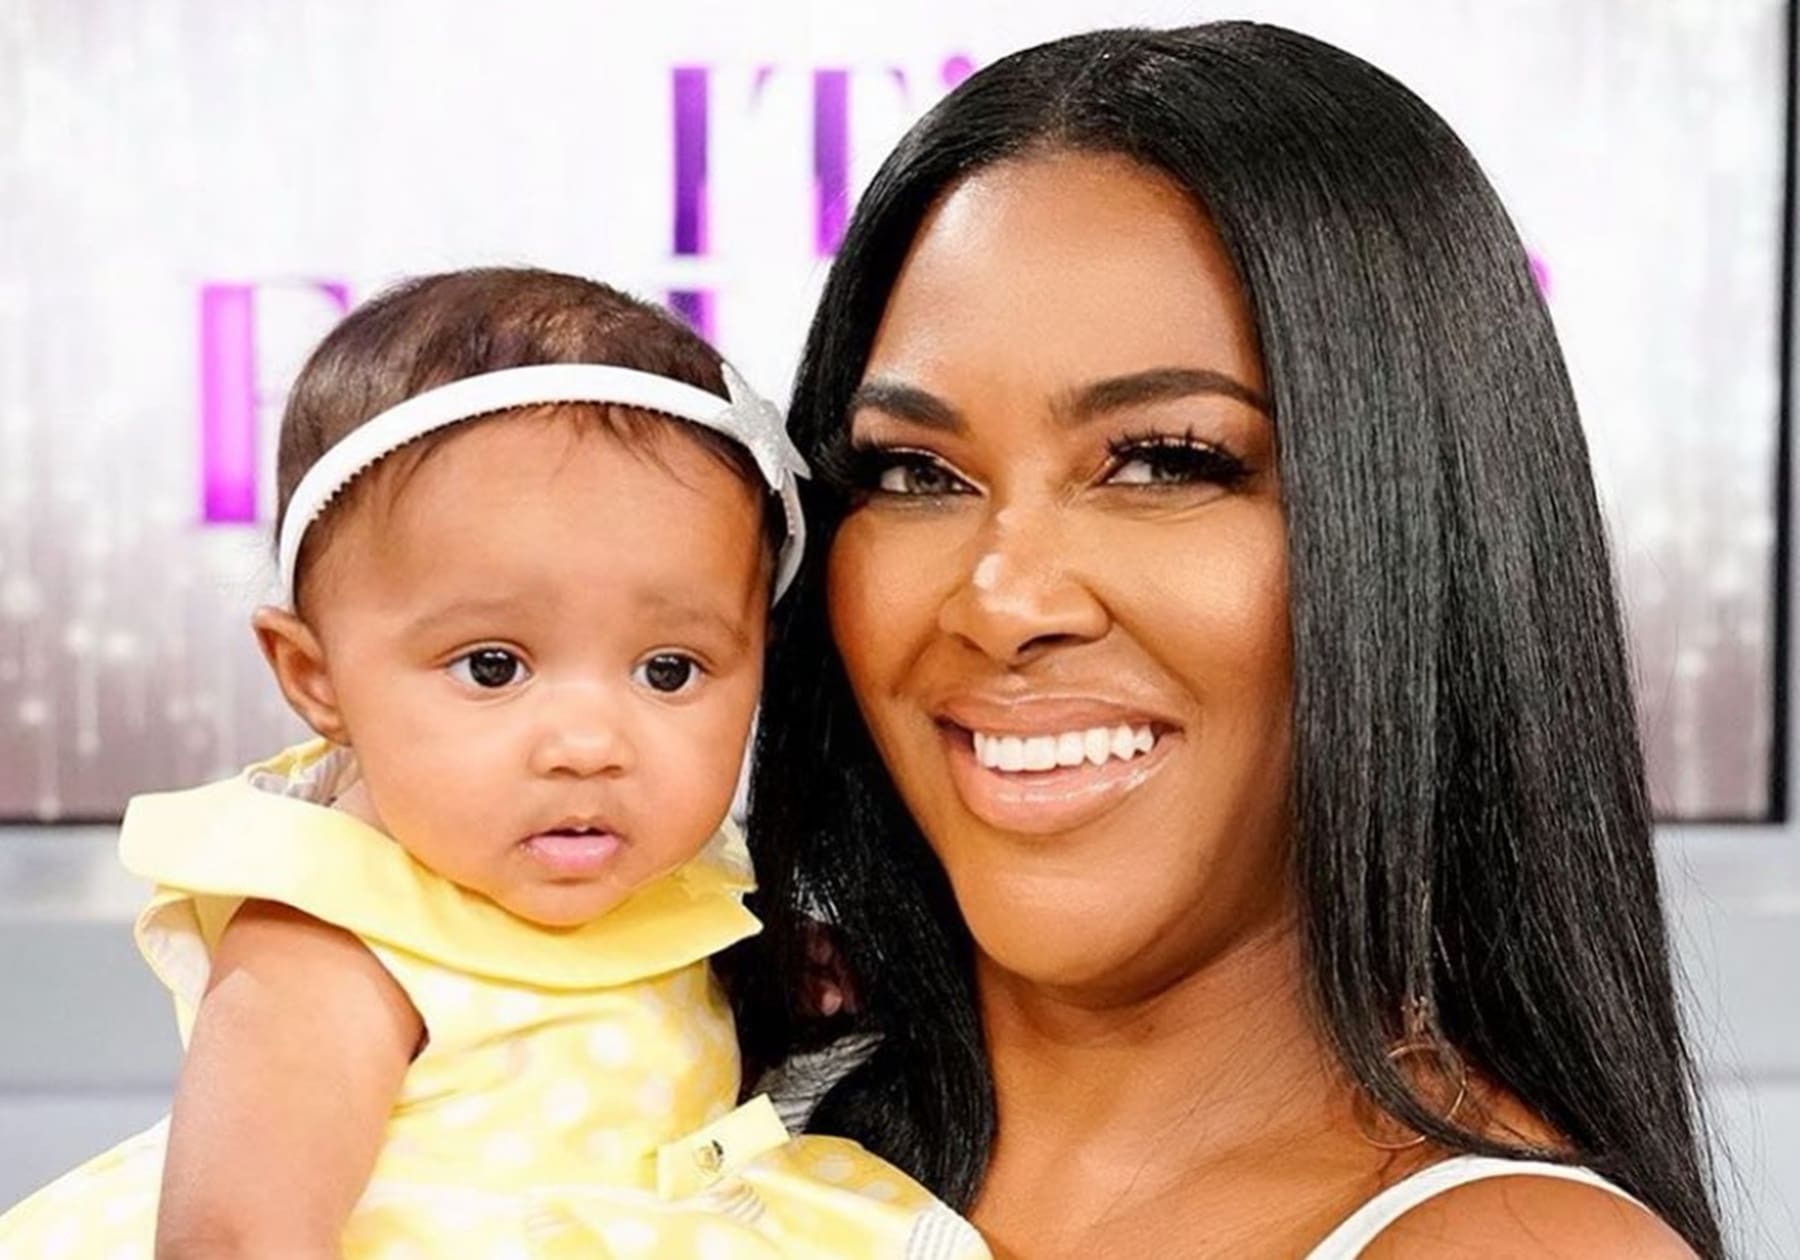 Kenya Moore Talks About Her Unconditional Love For Baby Brooklyn Daly